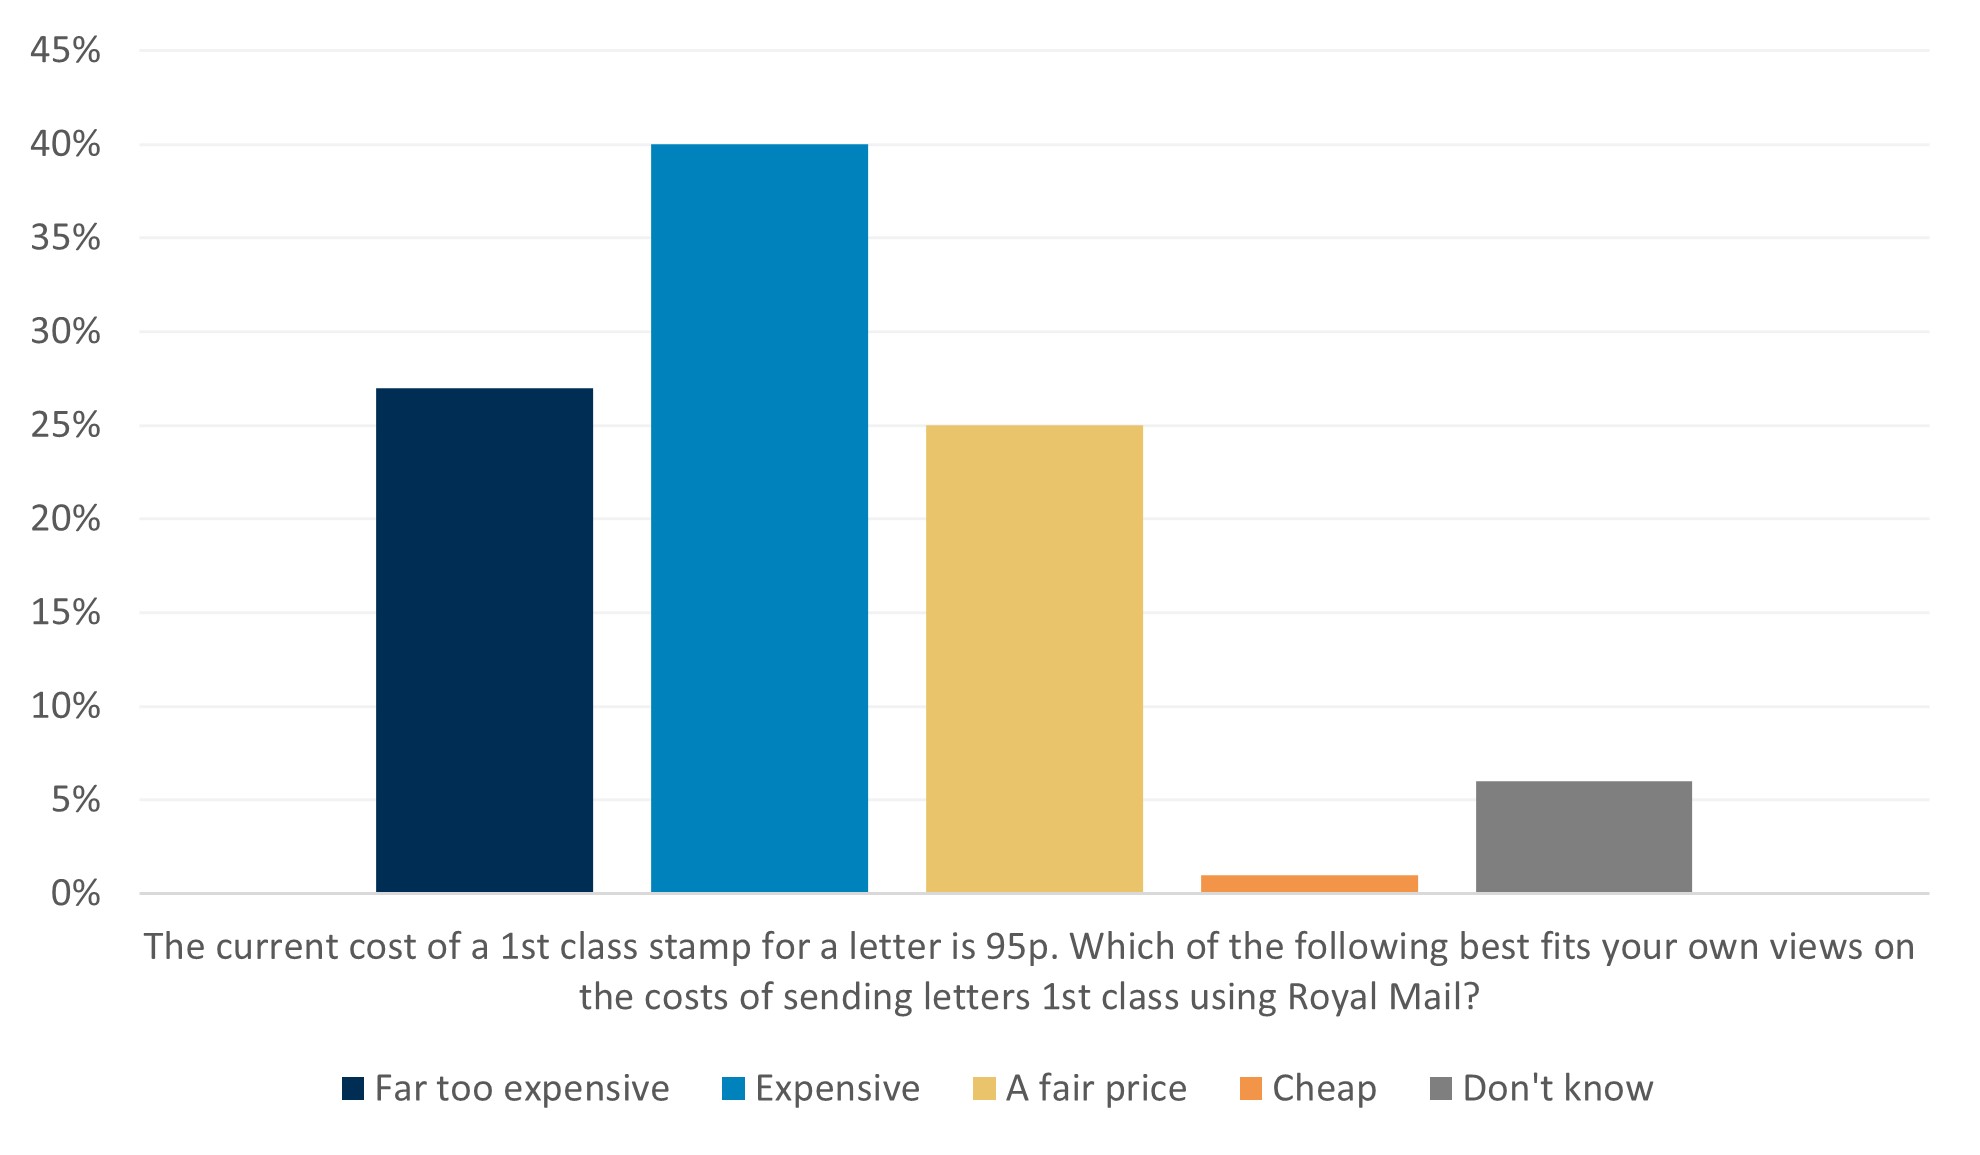 Results of survey question "The current cost of a 1st class stamp for a letter is 95p. Which of the following best fits your own views on the costs of sending letters 1st class using Royal Mail? 27% said it was far too expensive, 40% said it was expensive, 25% said it was a fair price, 1% said it was cheap, 8% said they don't know.